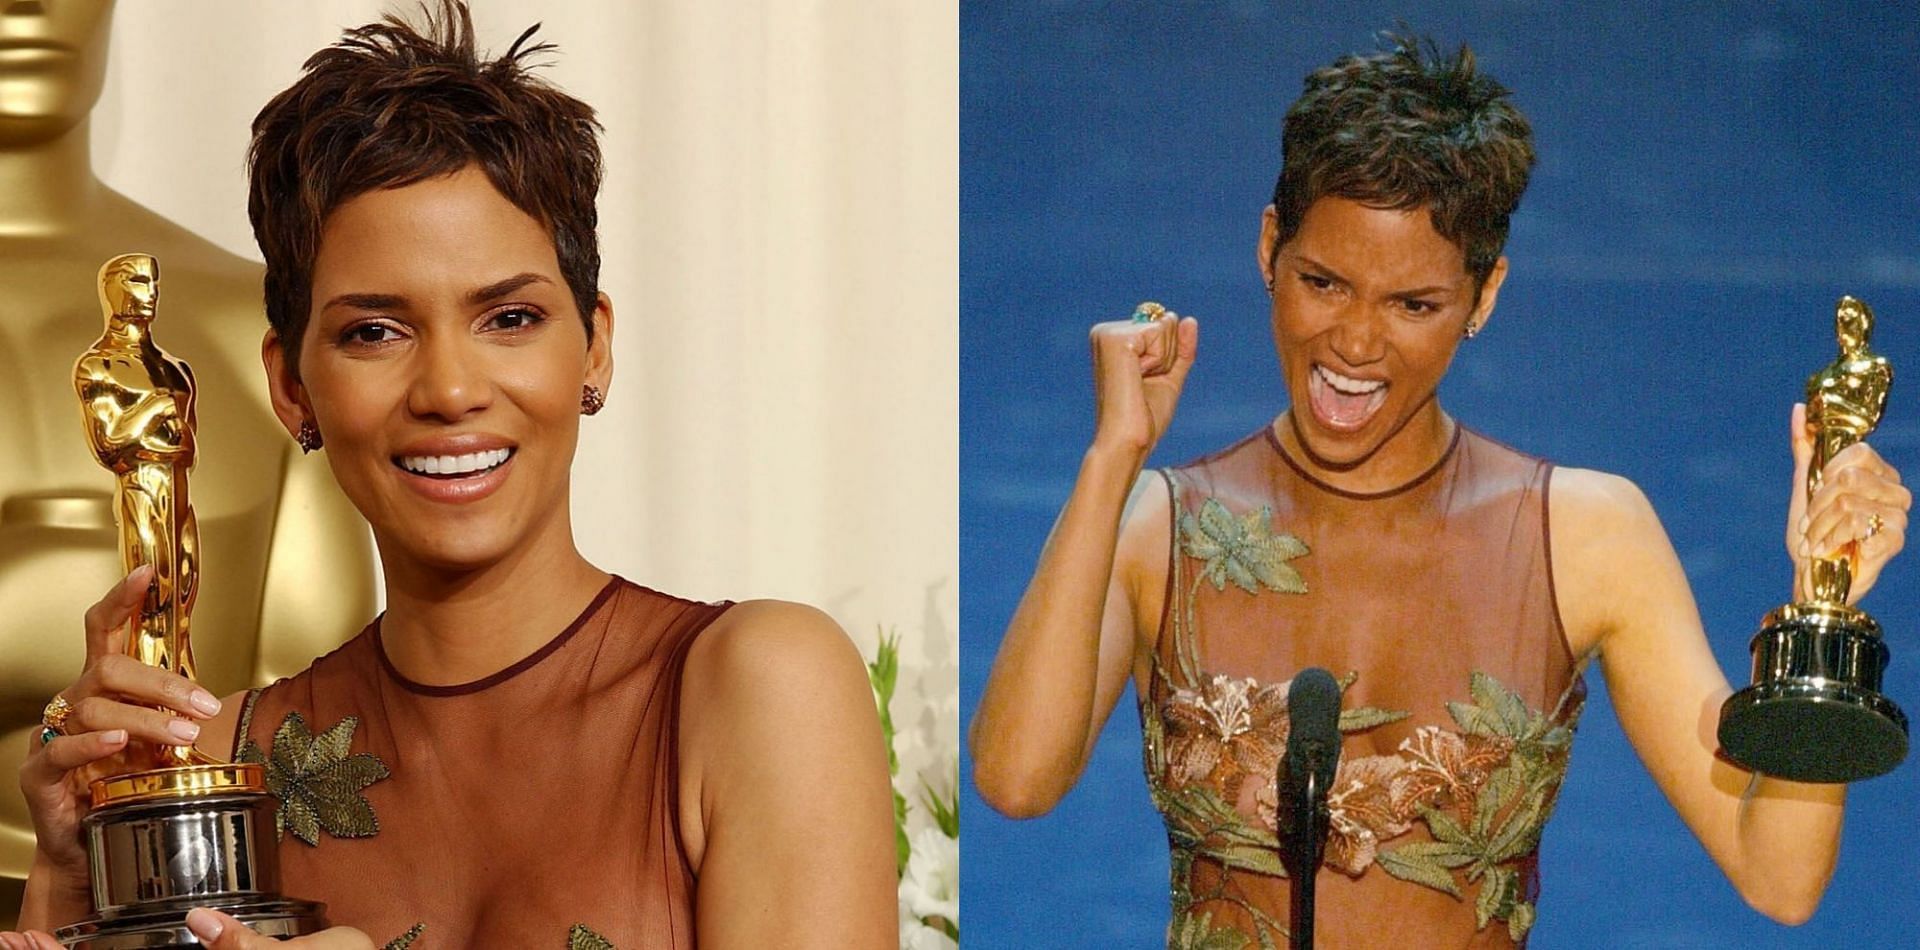 Halle Berry won the Oscar award for Best Actress for the 2001 film &#039;Monster&#039;s Ball&#039; (Image via Frank Micelotta/GettyImages and Timothy A. Clary/Getty Images)